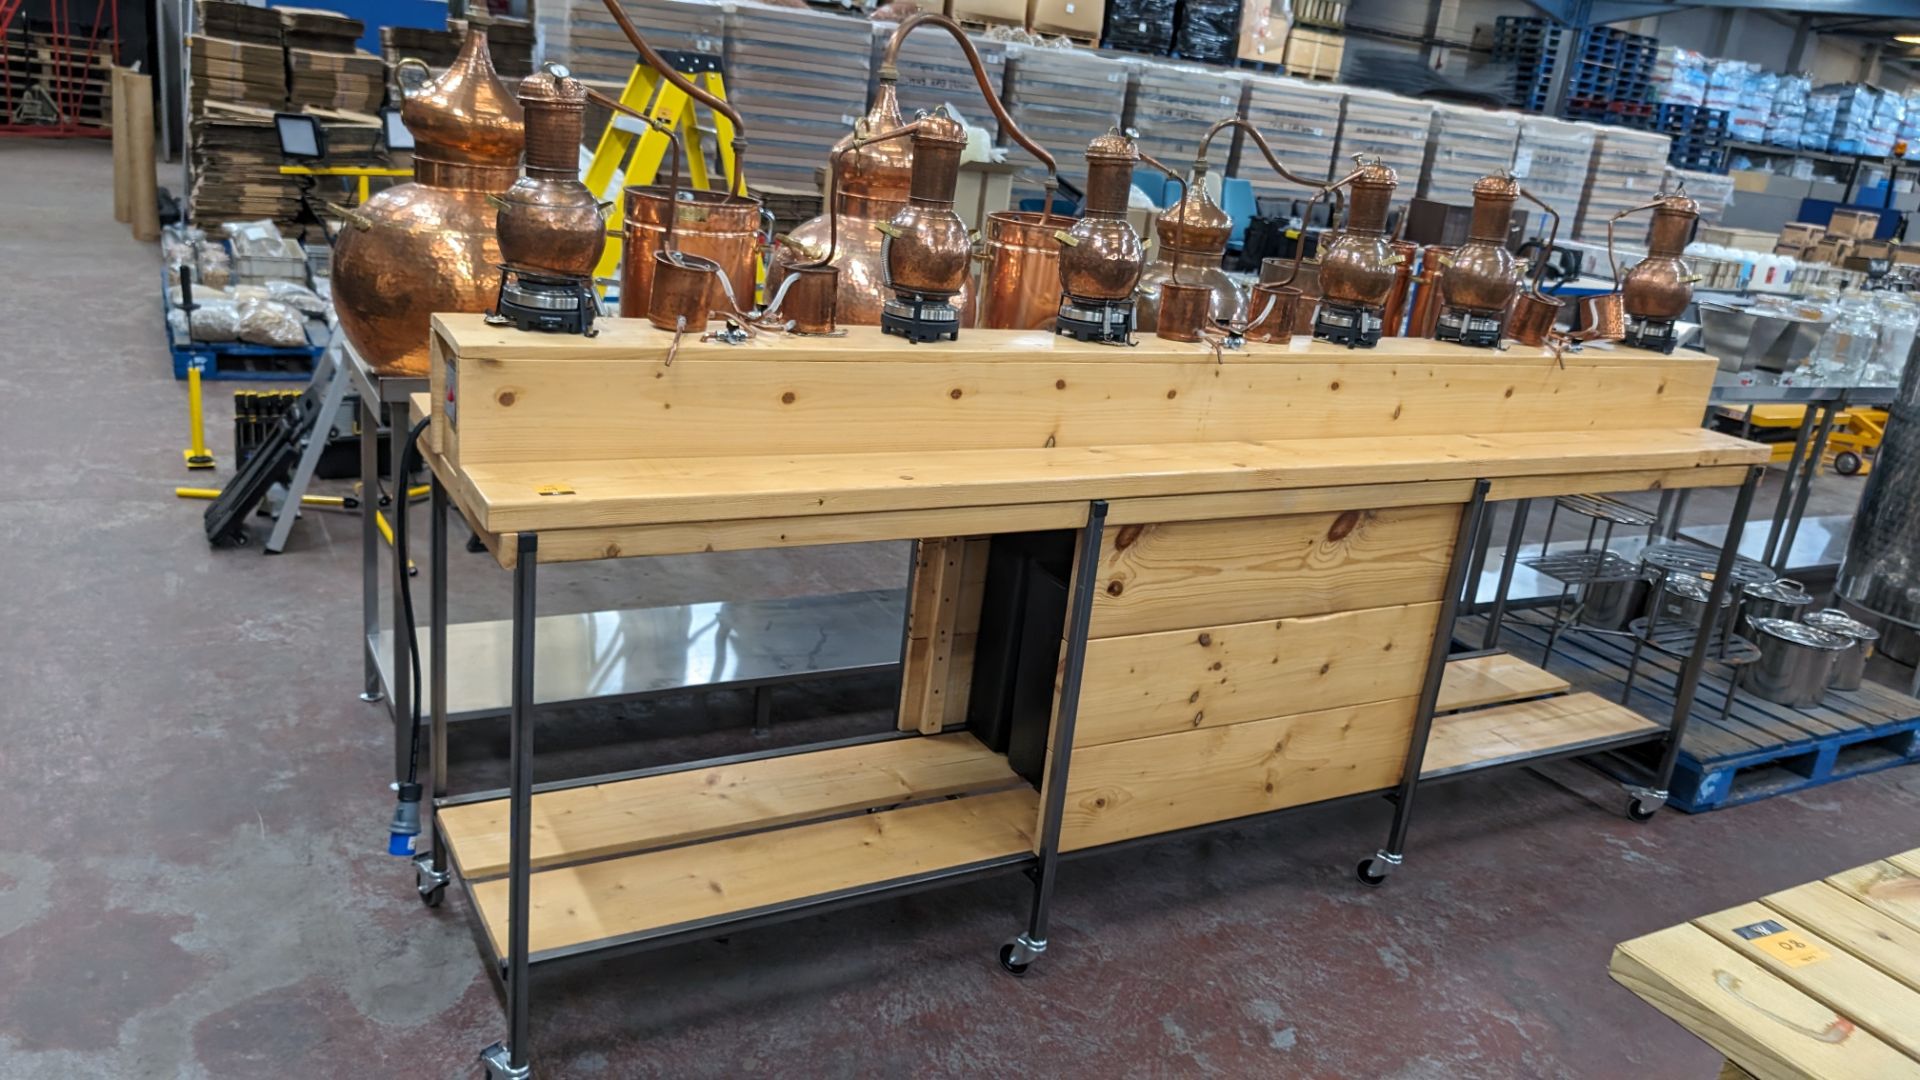 6 off small stills plus mobile bench. This lot comprises a custom made mobile bench with a metal fr - Image 3 of 18